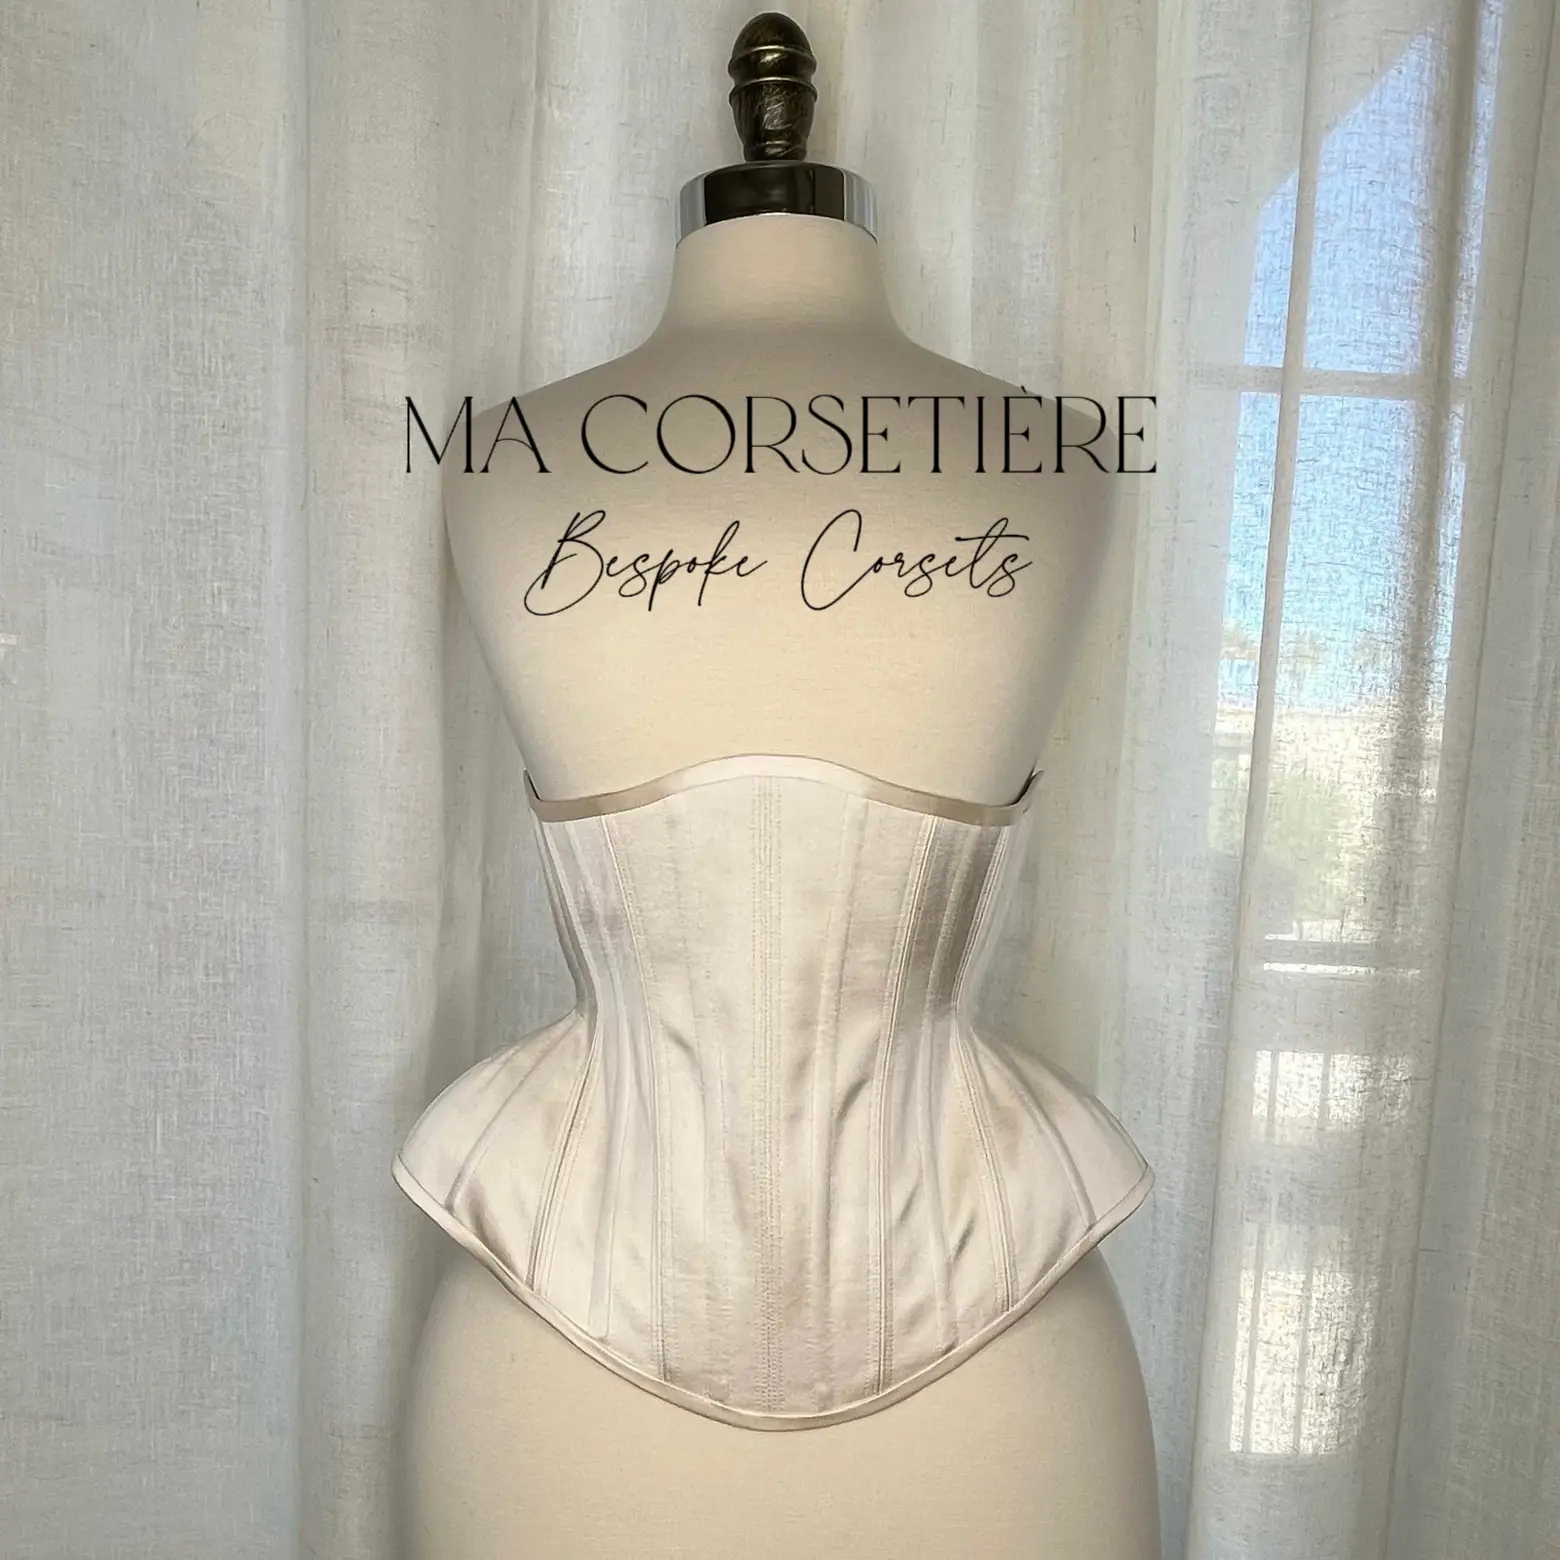 The Corsetiere